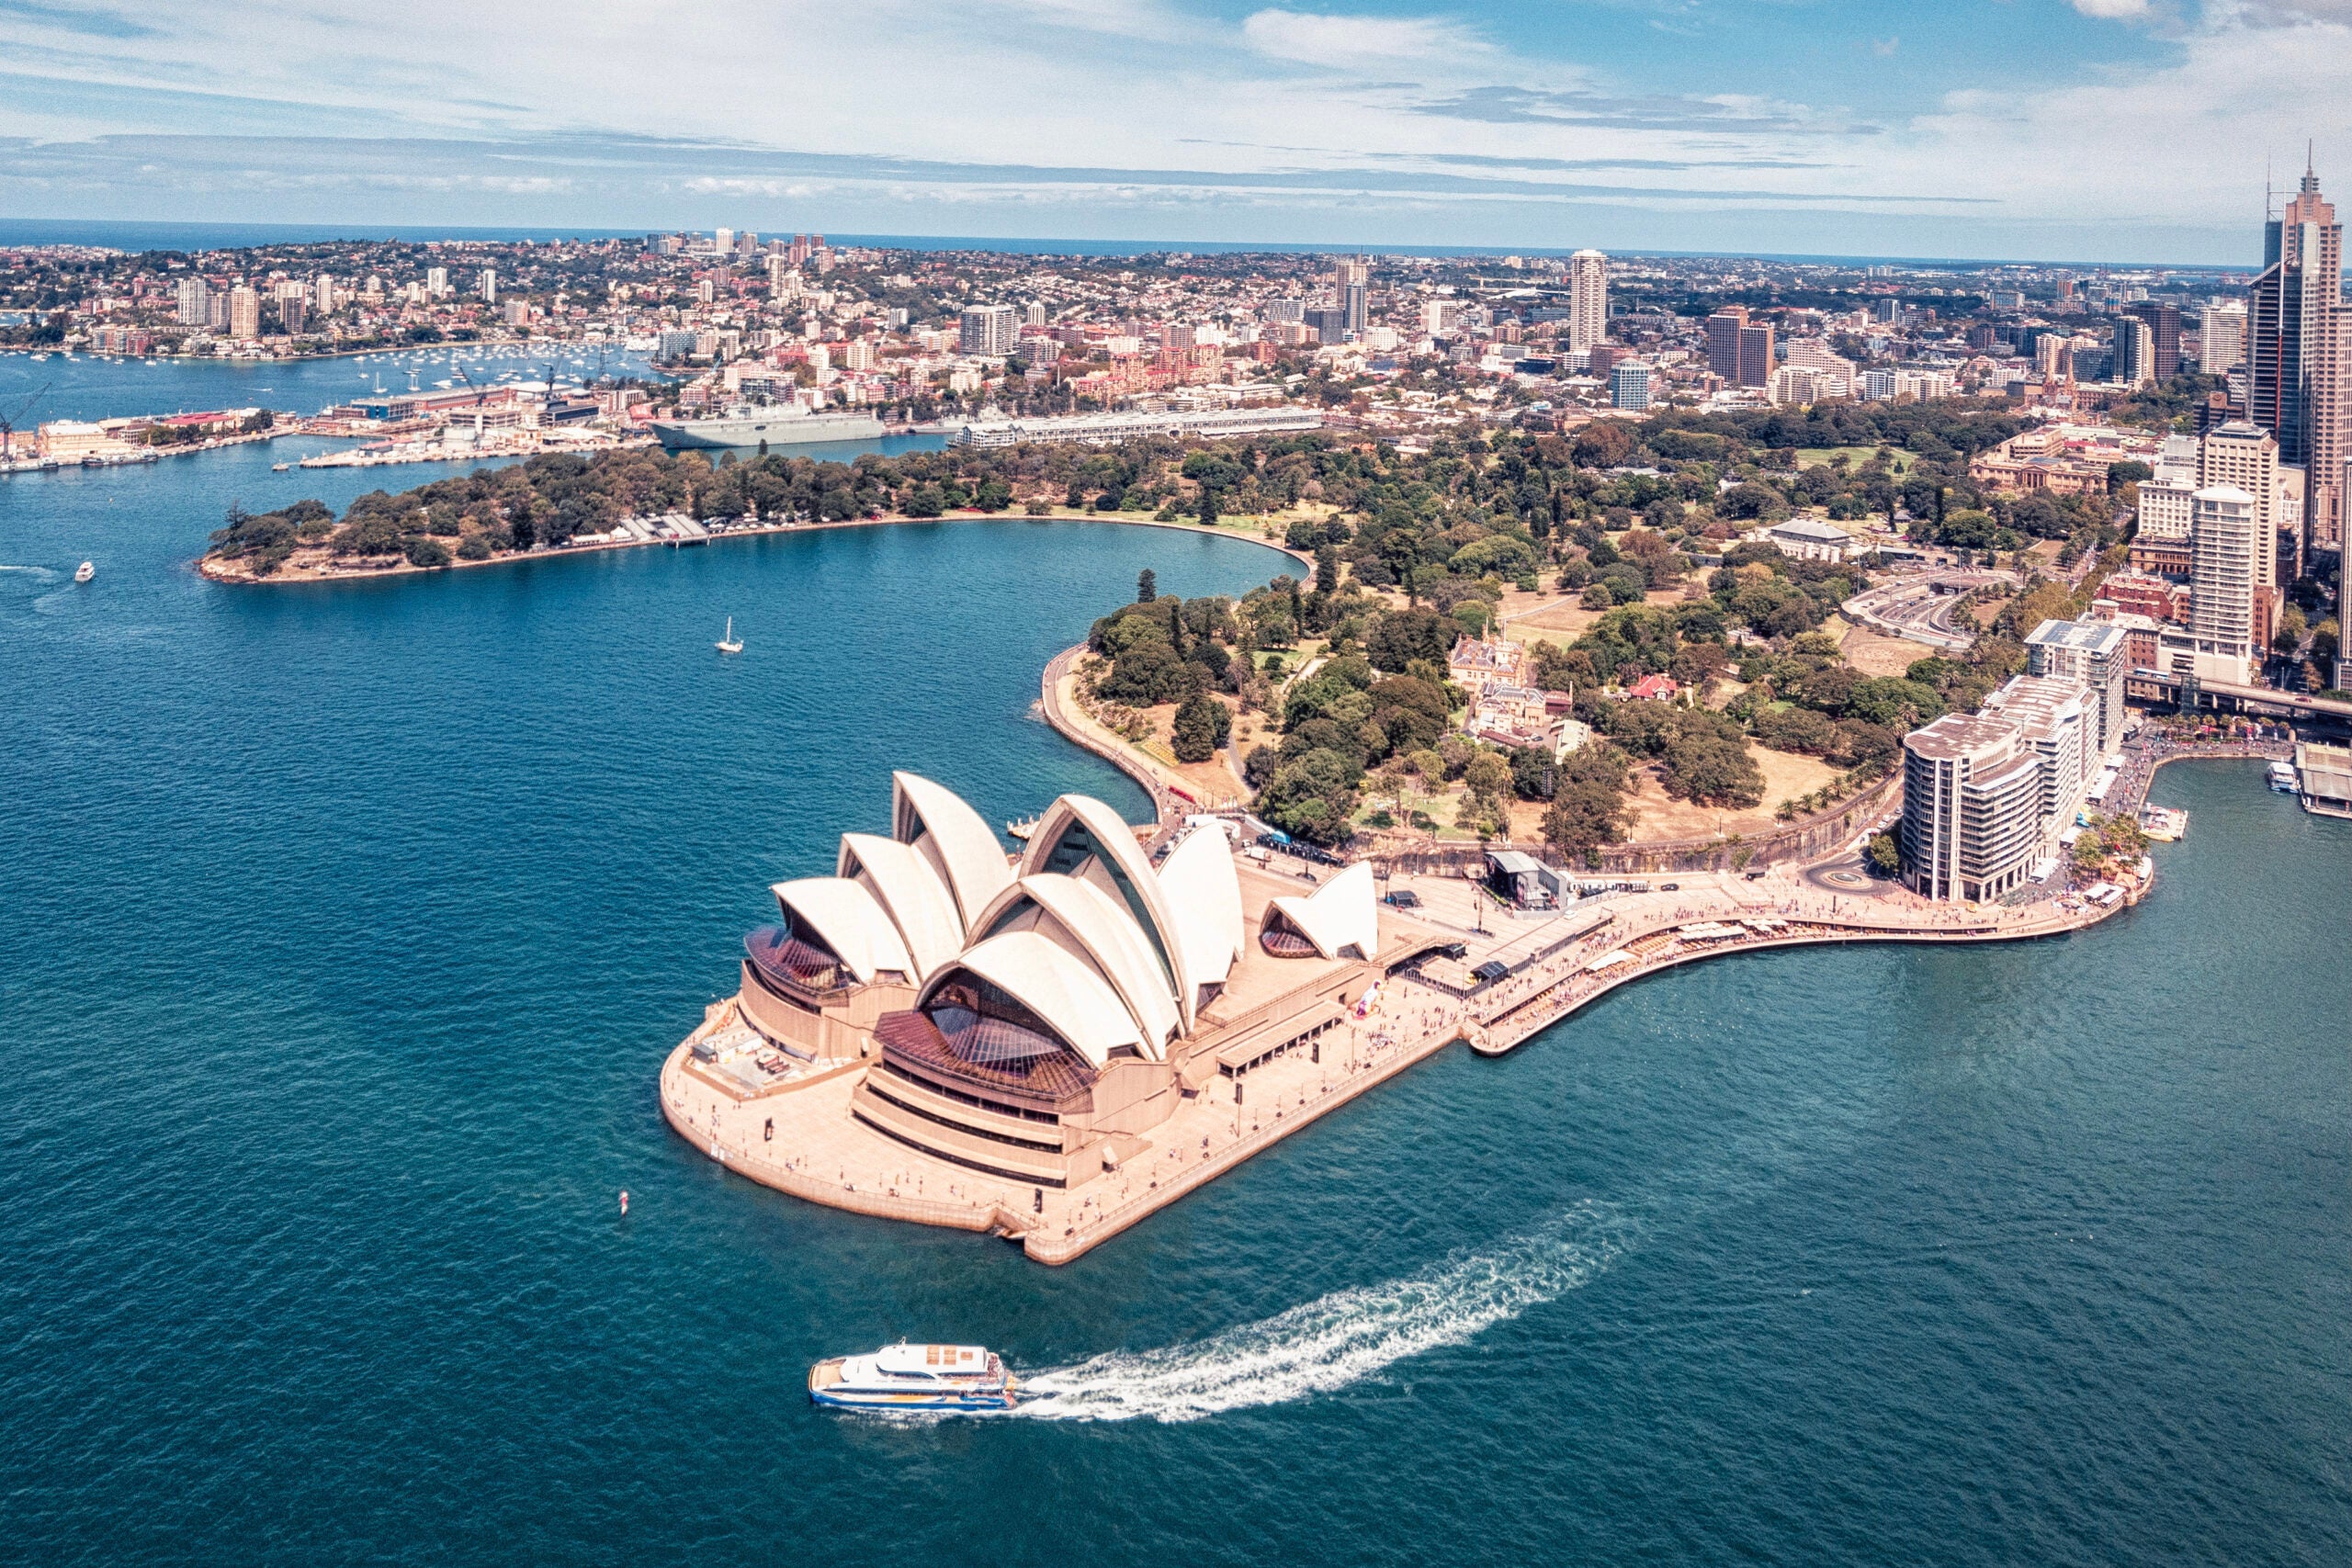 drone photo of the Sydney Opera house and city center with skyscrapers and buildings.